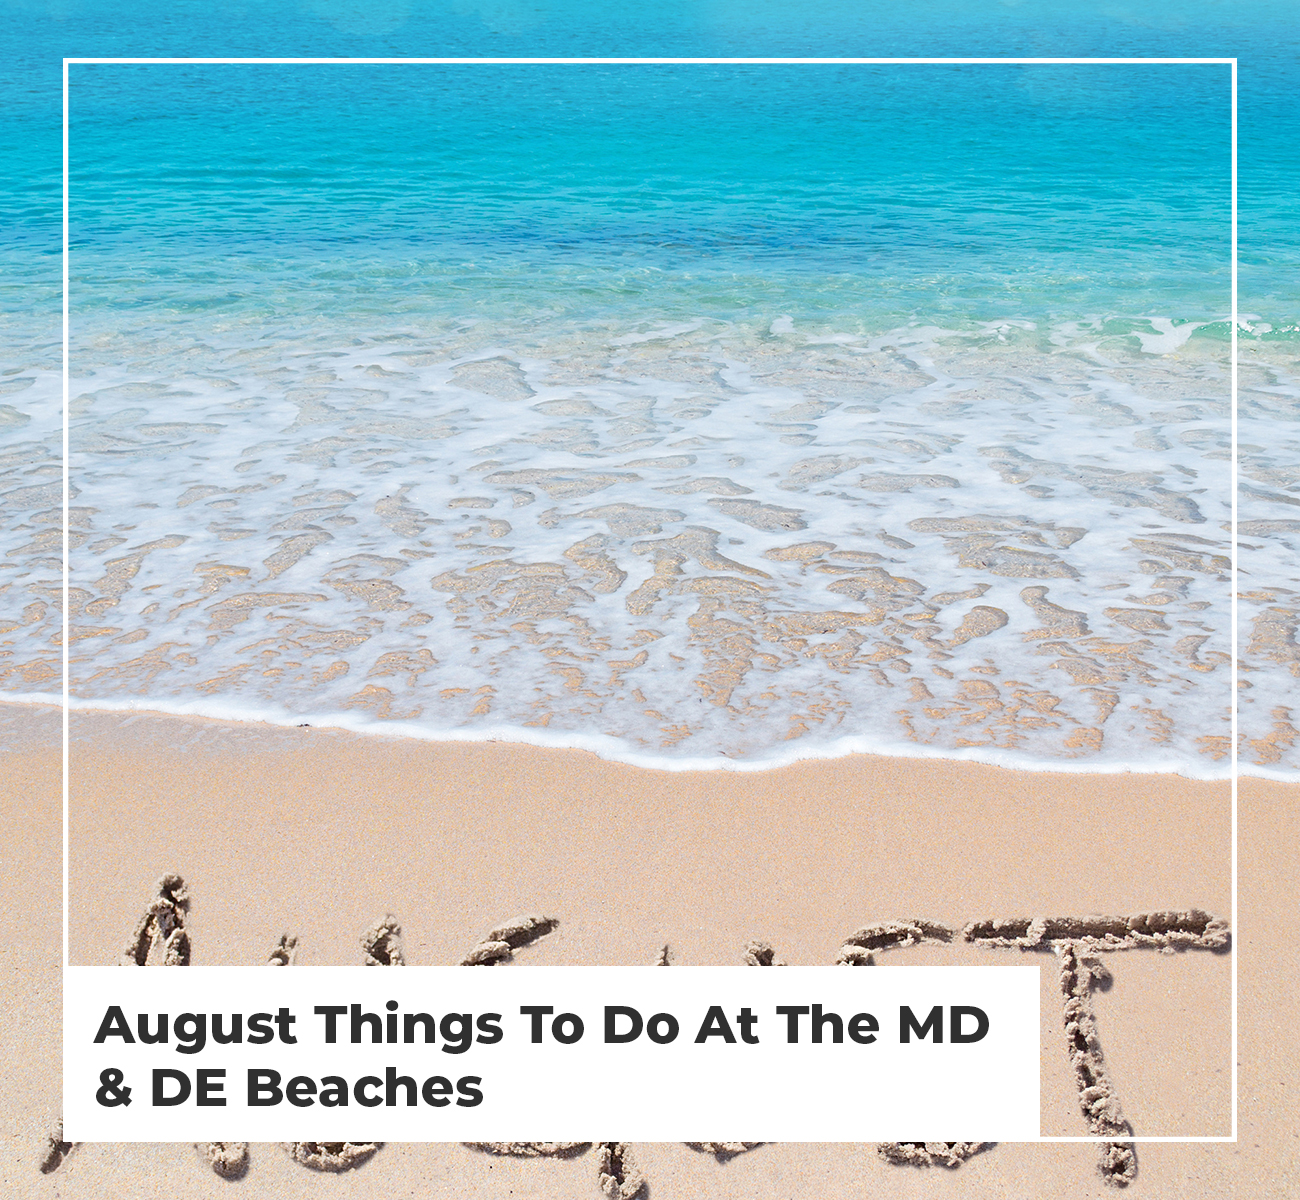 August Things To Do At The MD & DE Beaches - Main Image